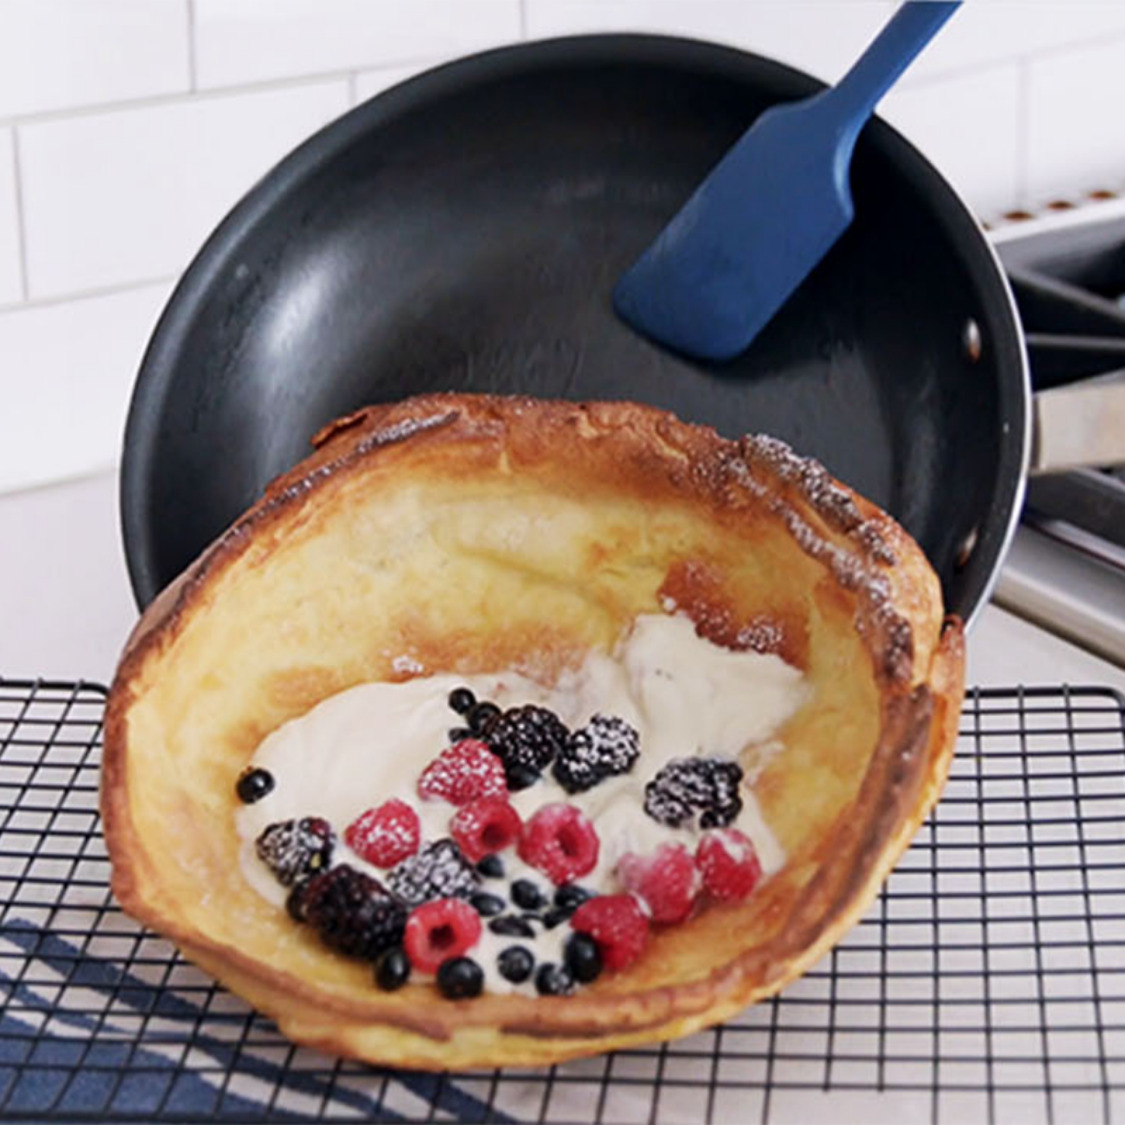 The Misen Nonstick Pan can be used in a variety of ways, including making dutch baby pancakes.